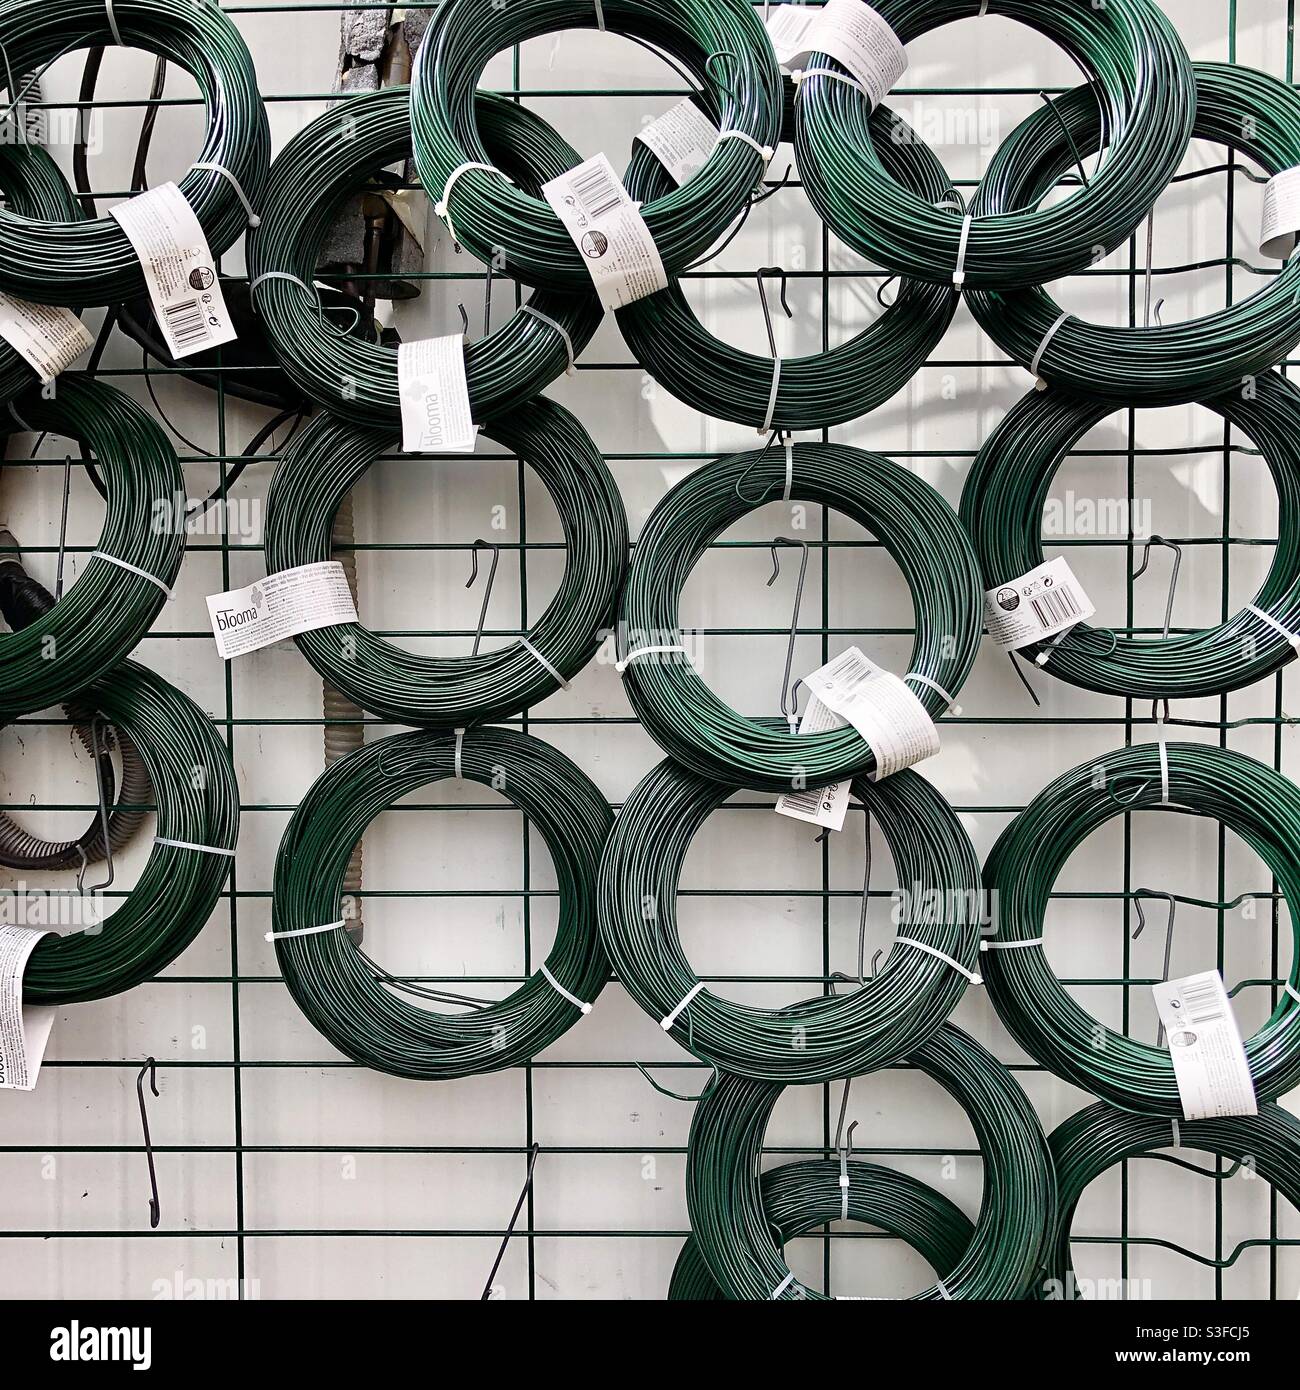 Display rack of plastic covered garden wire. Stock Photo